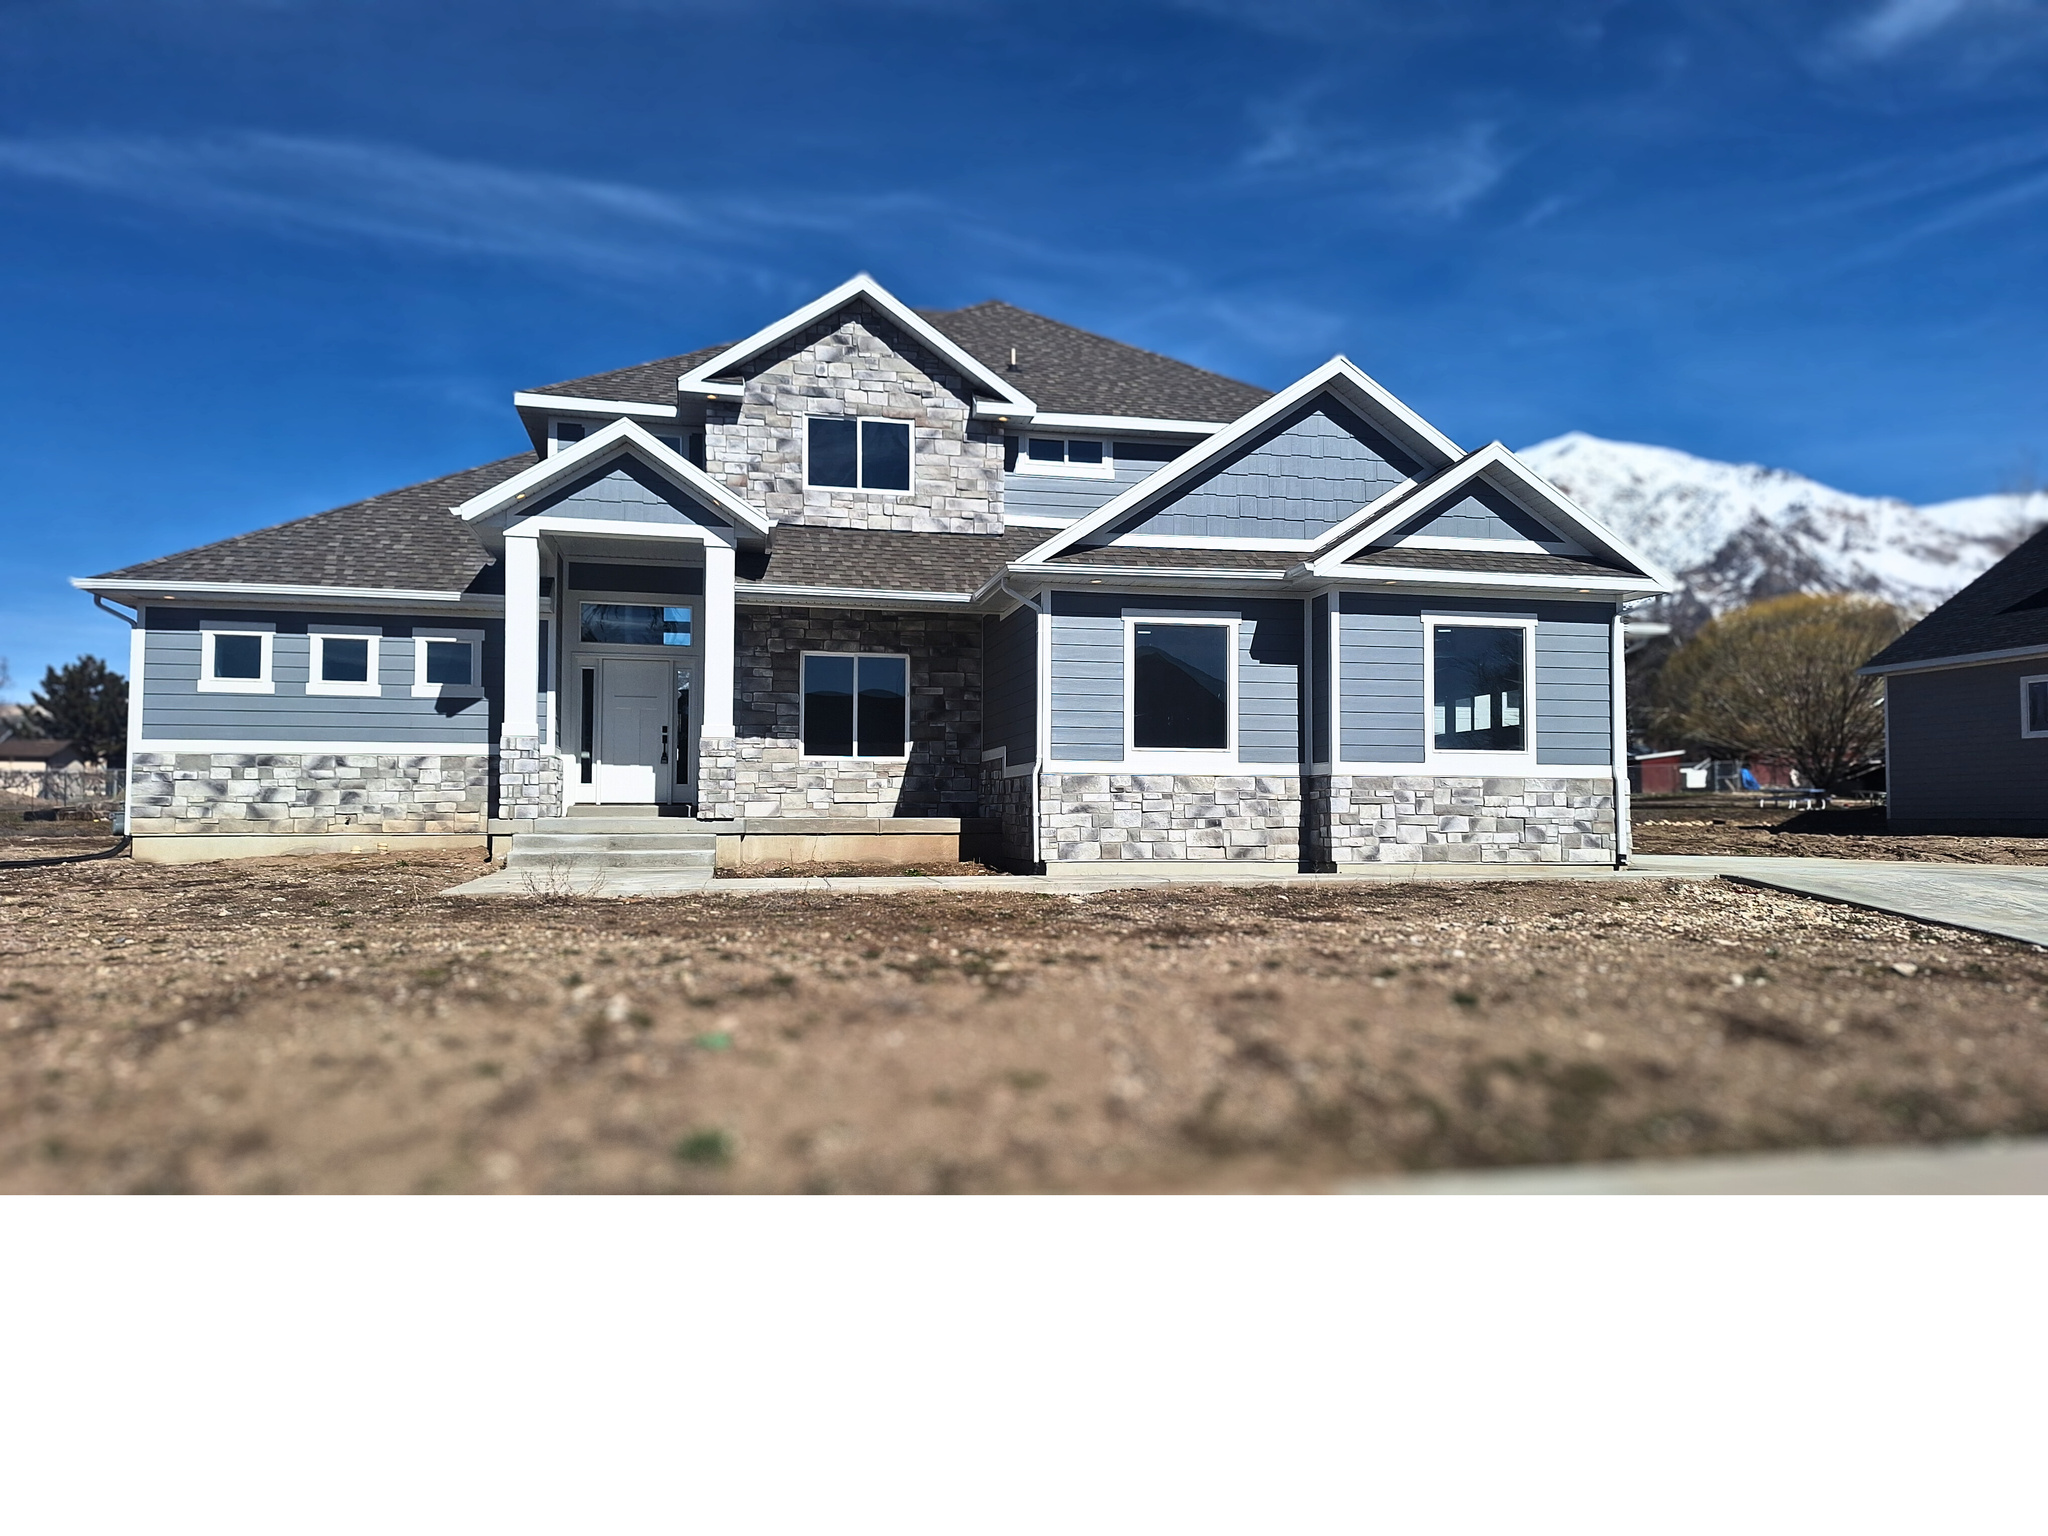 1016 W MOUNTAIN ORCHARD, Pleasant View, Utah 84414, 4 Bedrooms Bedrooms, 14 Rooms Rooms,2 BathroomsBathrooms,Residential,For sale,MOUNTAIN ORCHARD,1988474